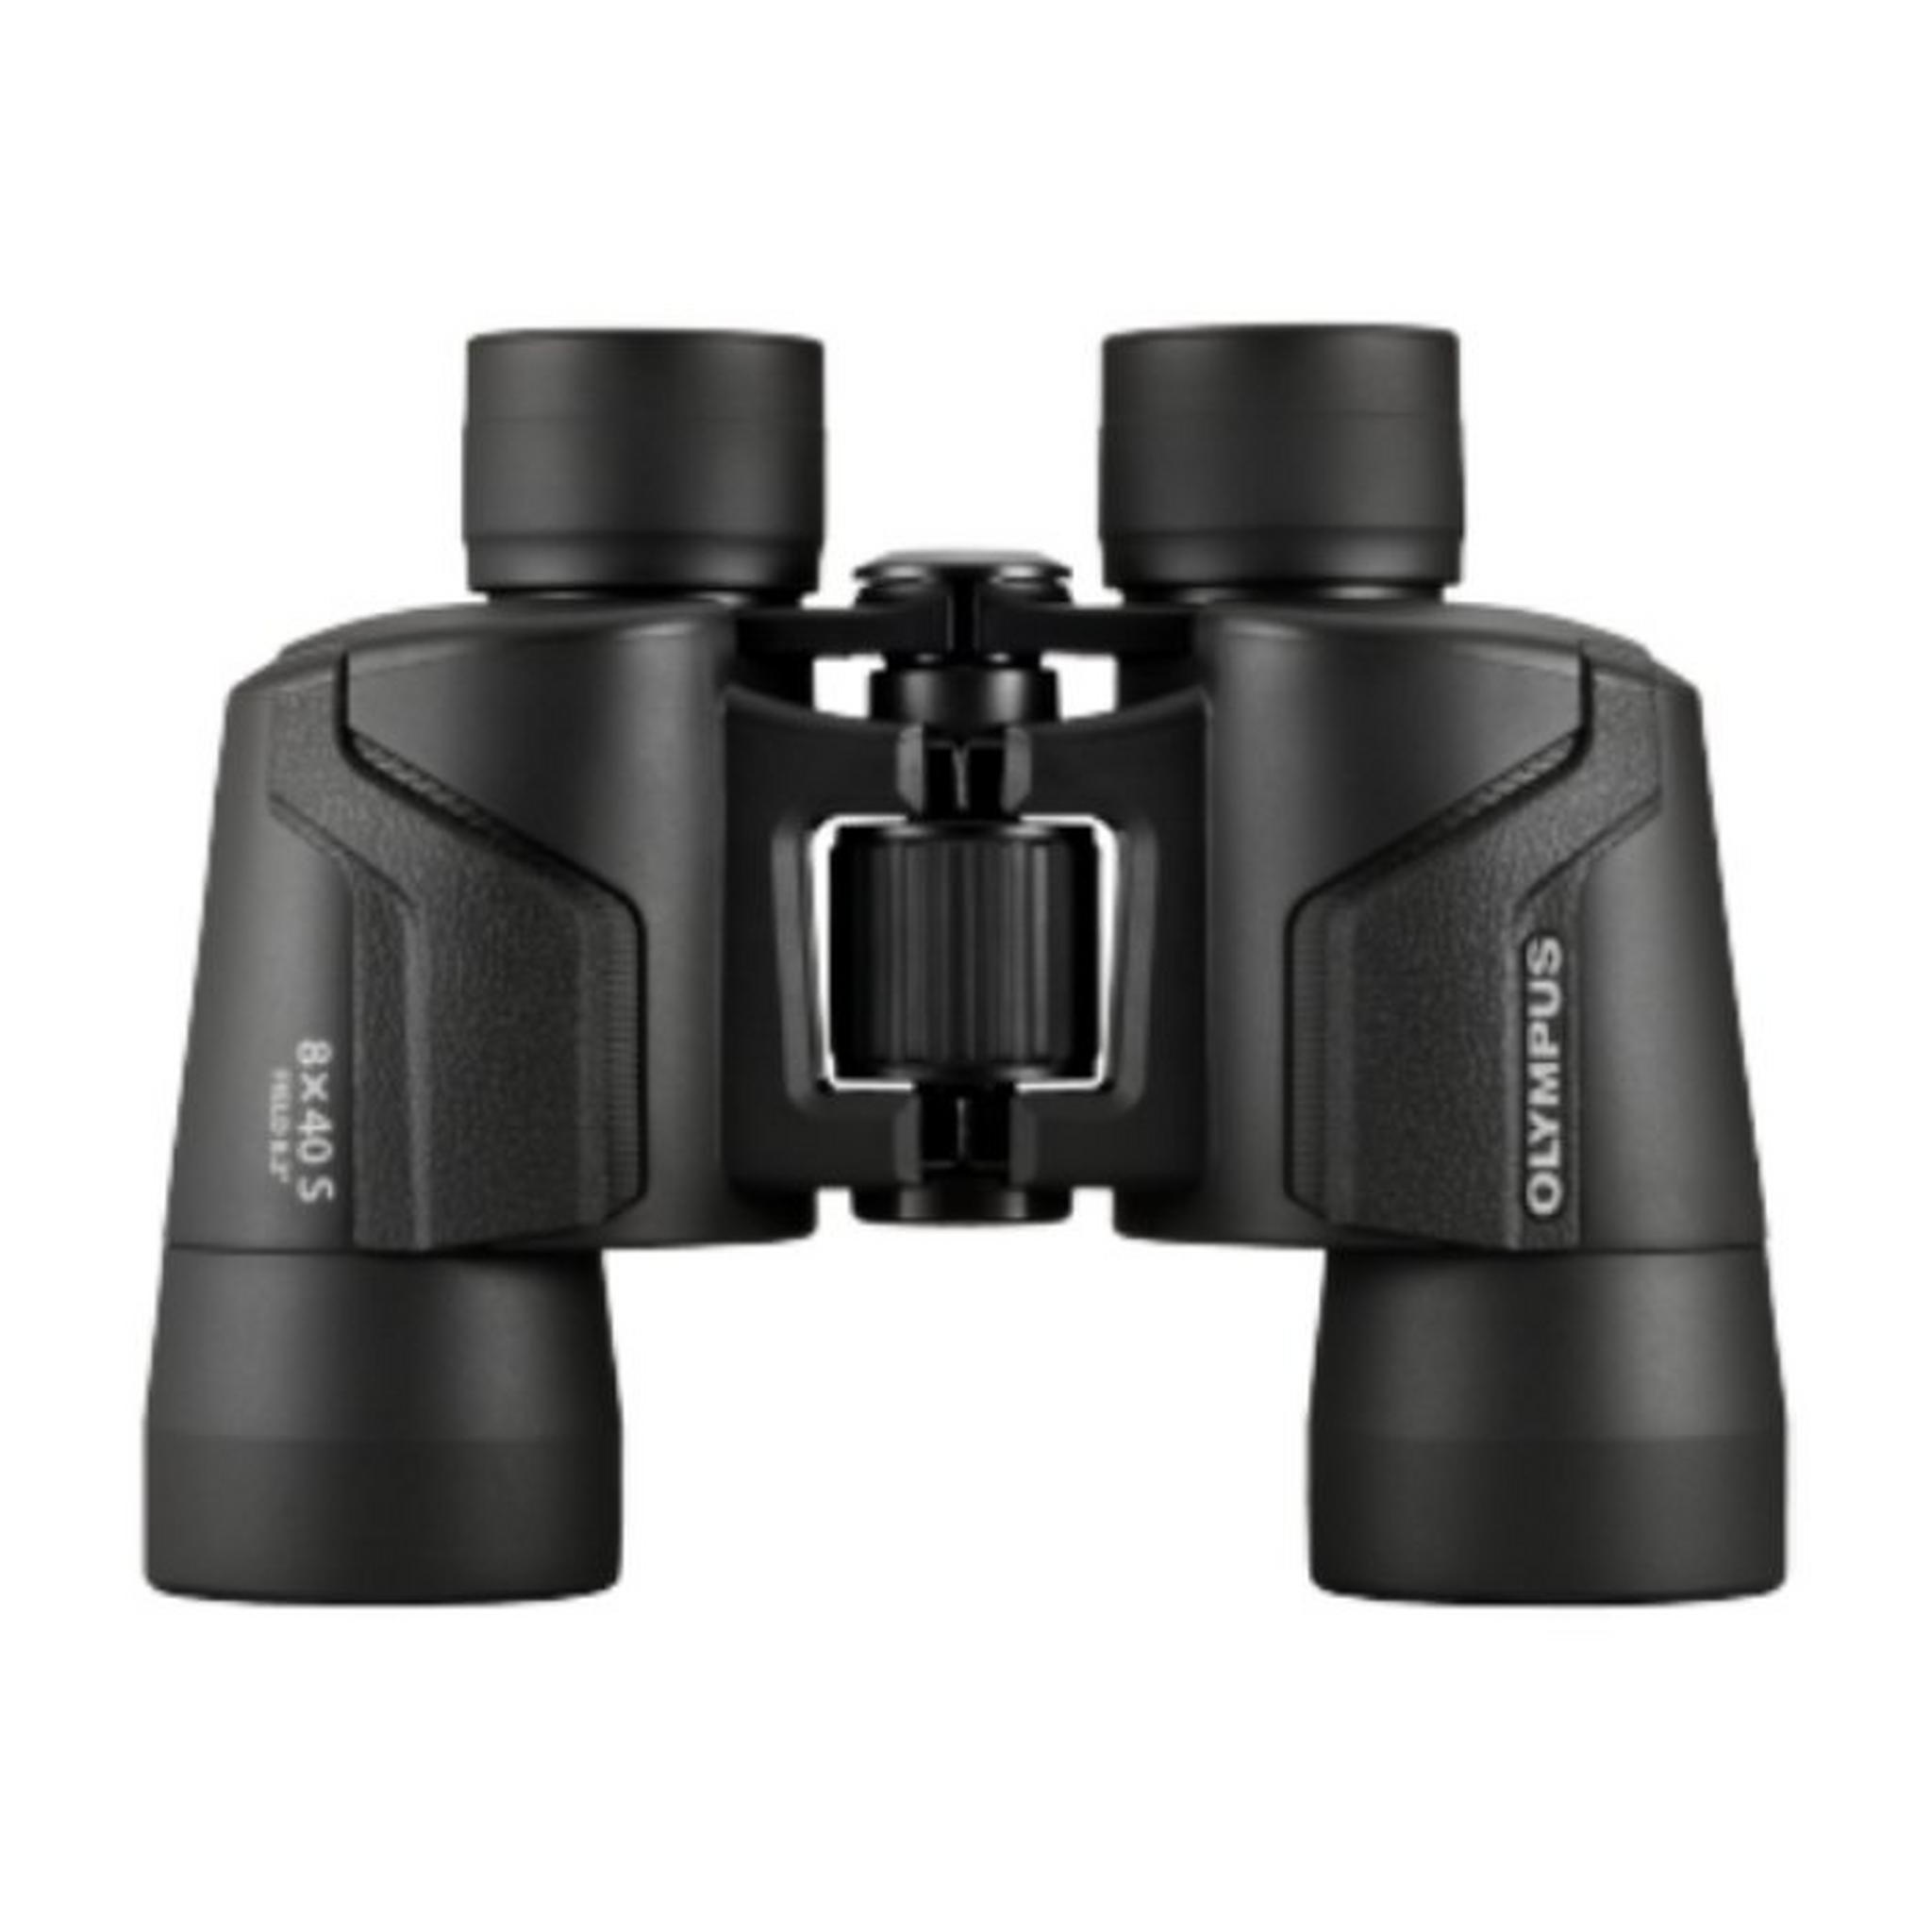 Olympus Standard Series 8x40 S Binocular with Case and Strap